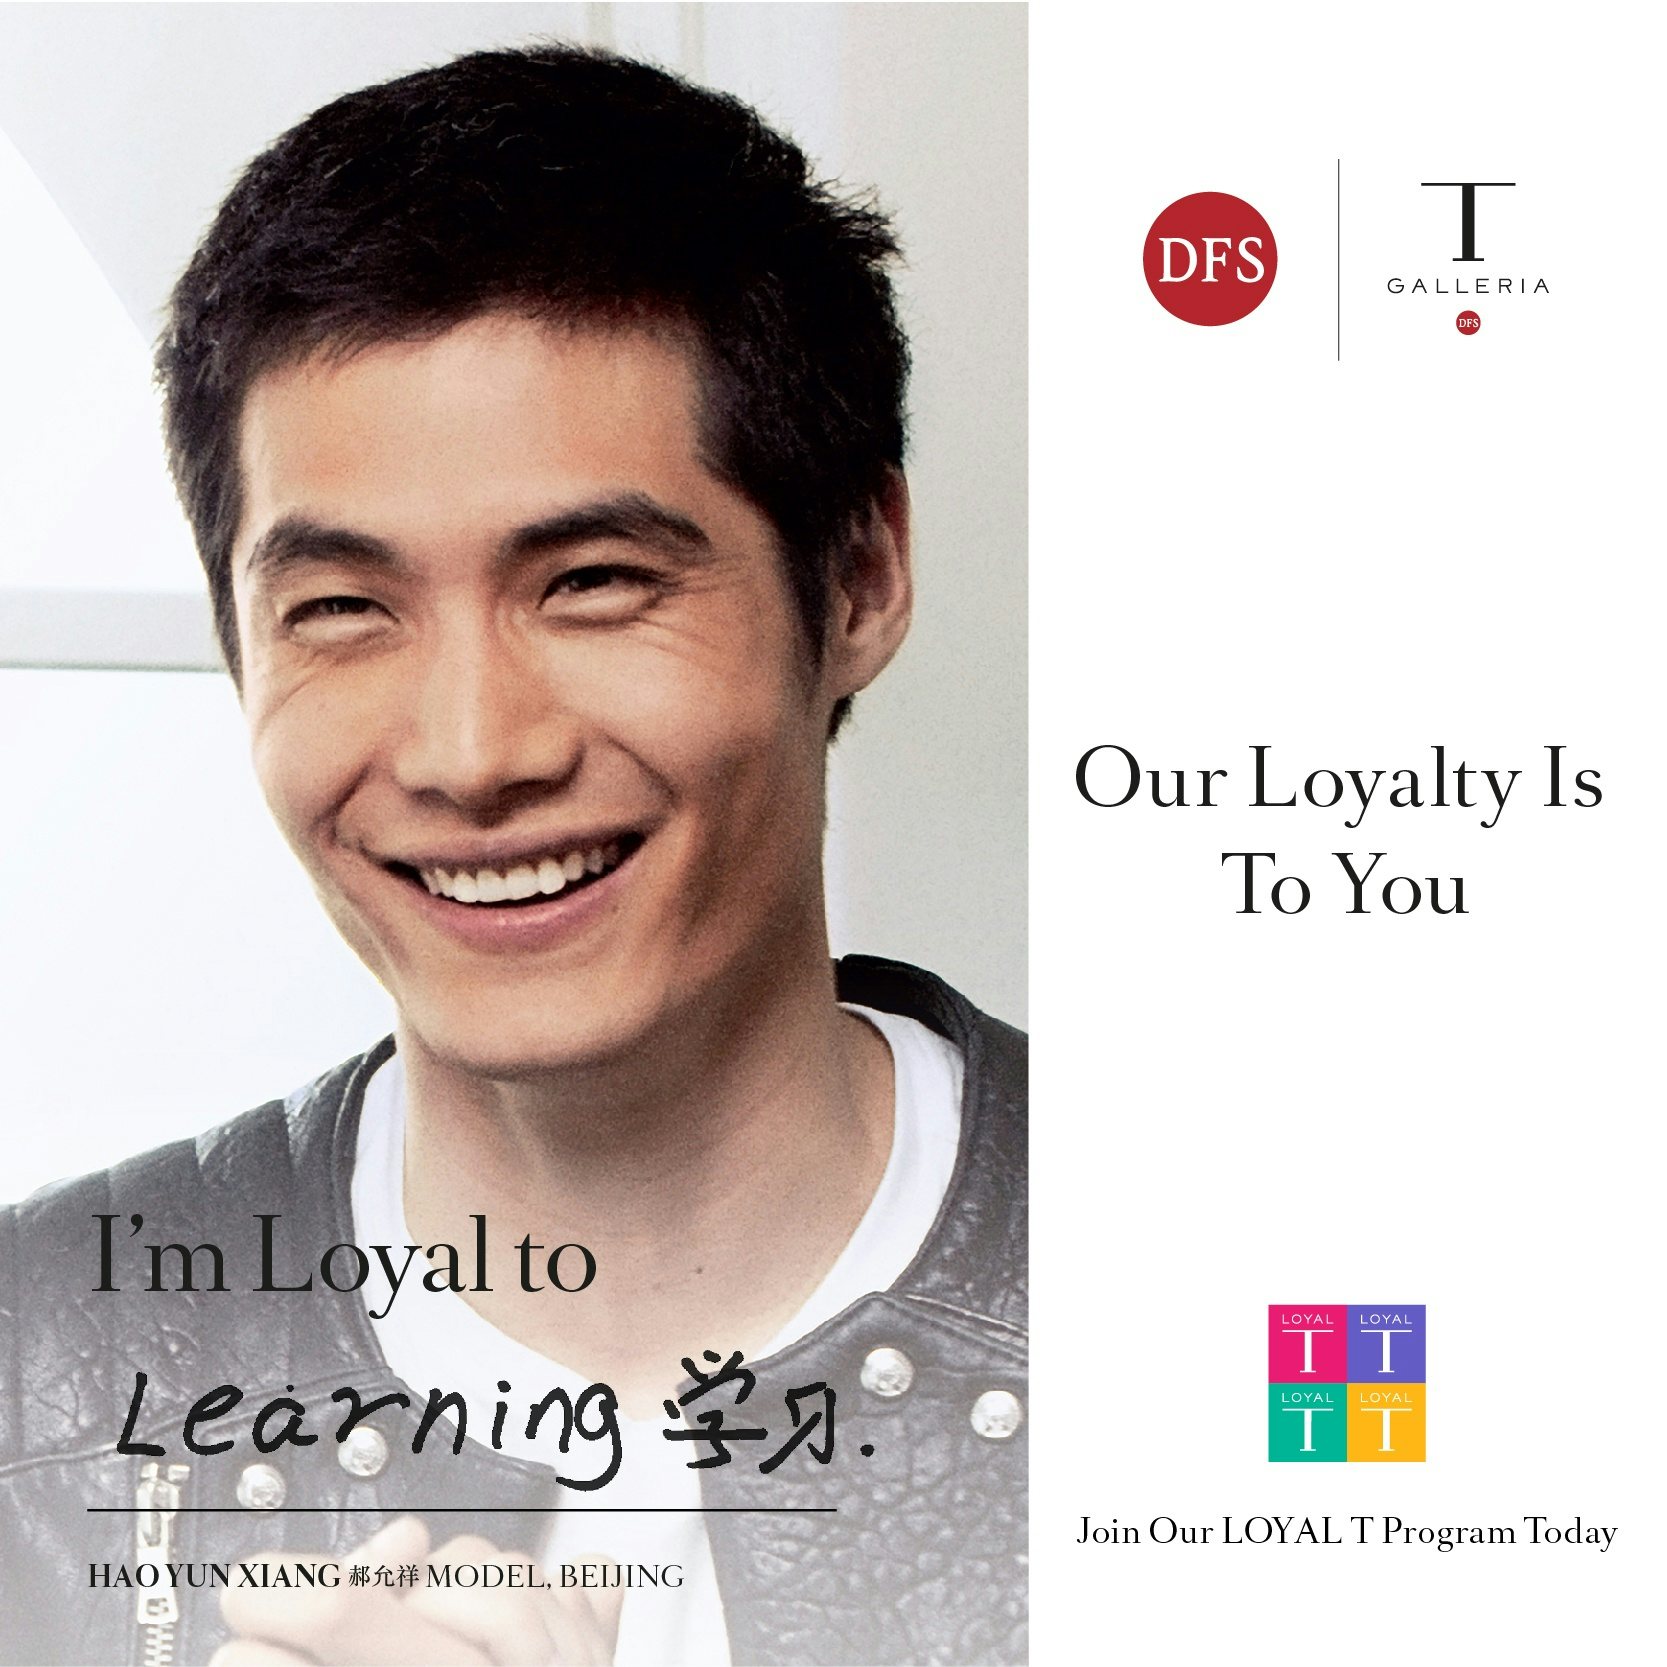 Model and KOL Hao Yun Xiang in DFS' new fall campaign to promote its loyalty program.